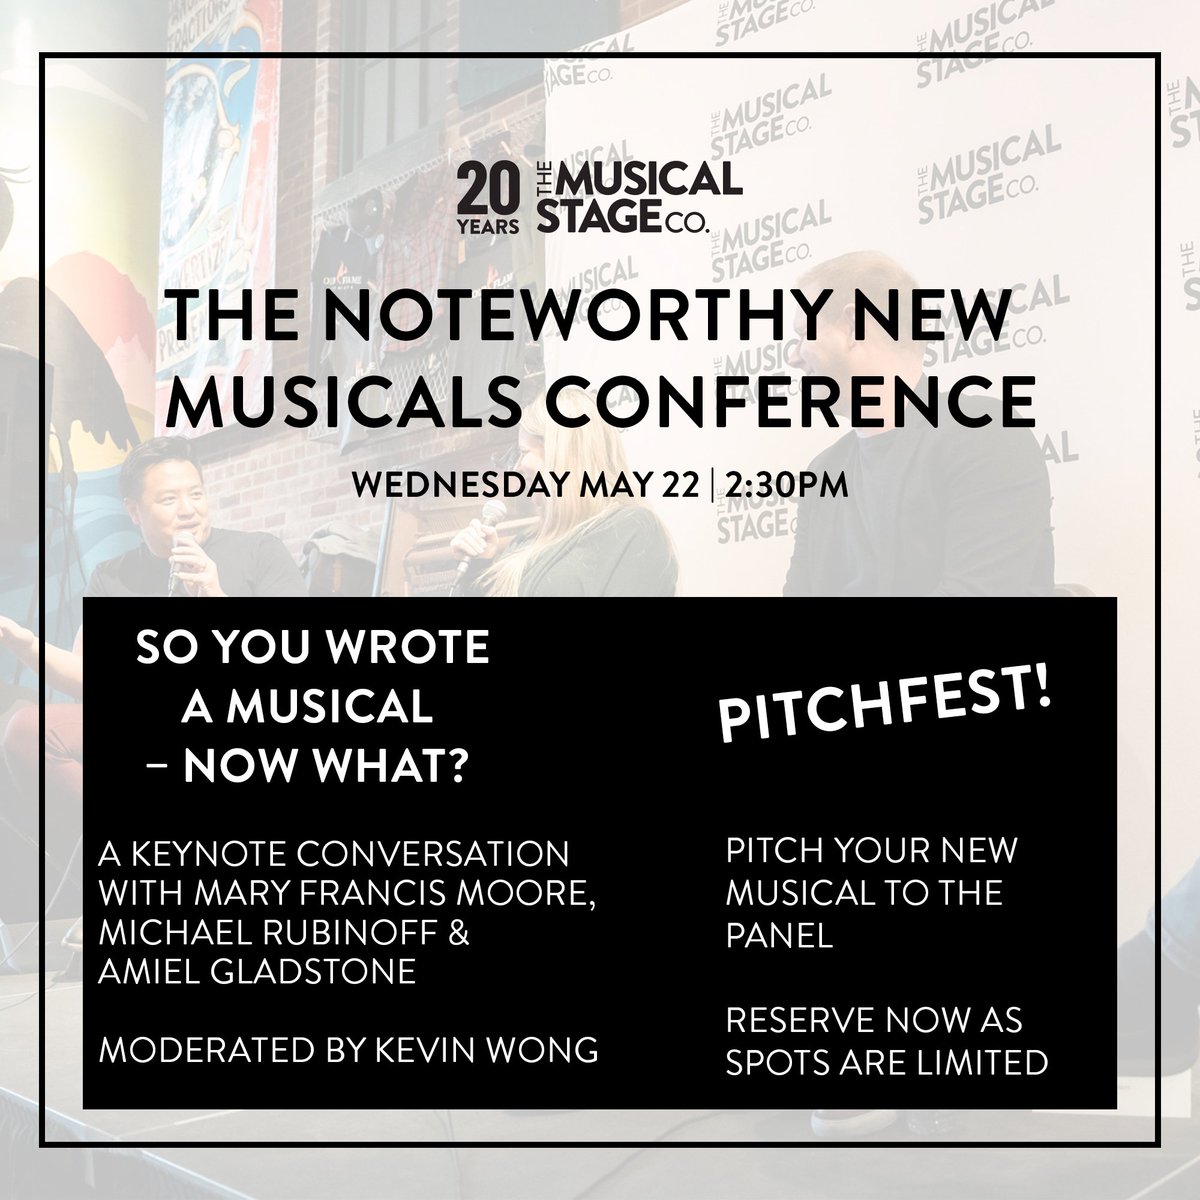 THE NOTEWORTHY NEW MUSICALS CONFERENCE IS BACK✨ Noteworthy kicks off the Canadian Festival of New Musicals! See the full schedule, meet the panelists, register for the conference and request your PITCHFEST slot: musicalstagecompany.com/shows/canadian… #CanadianMT #torontotheatre